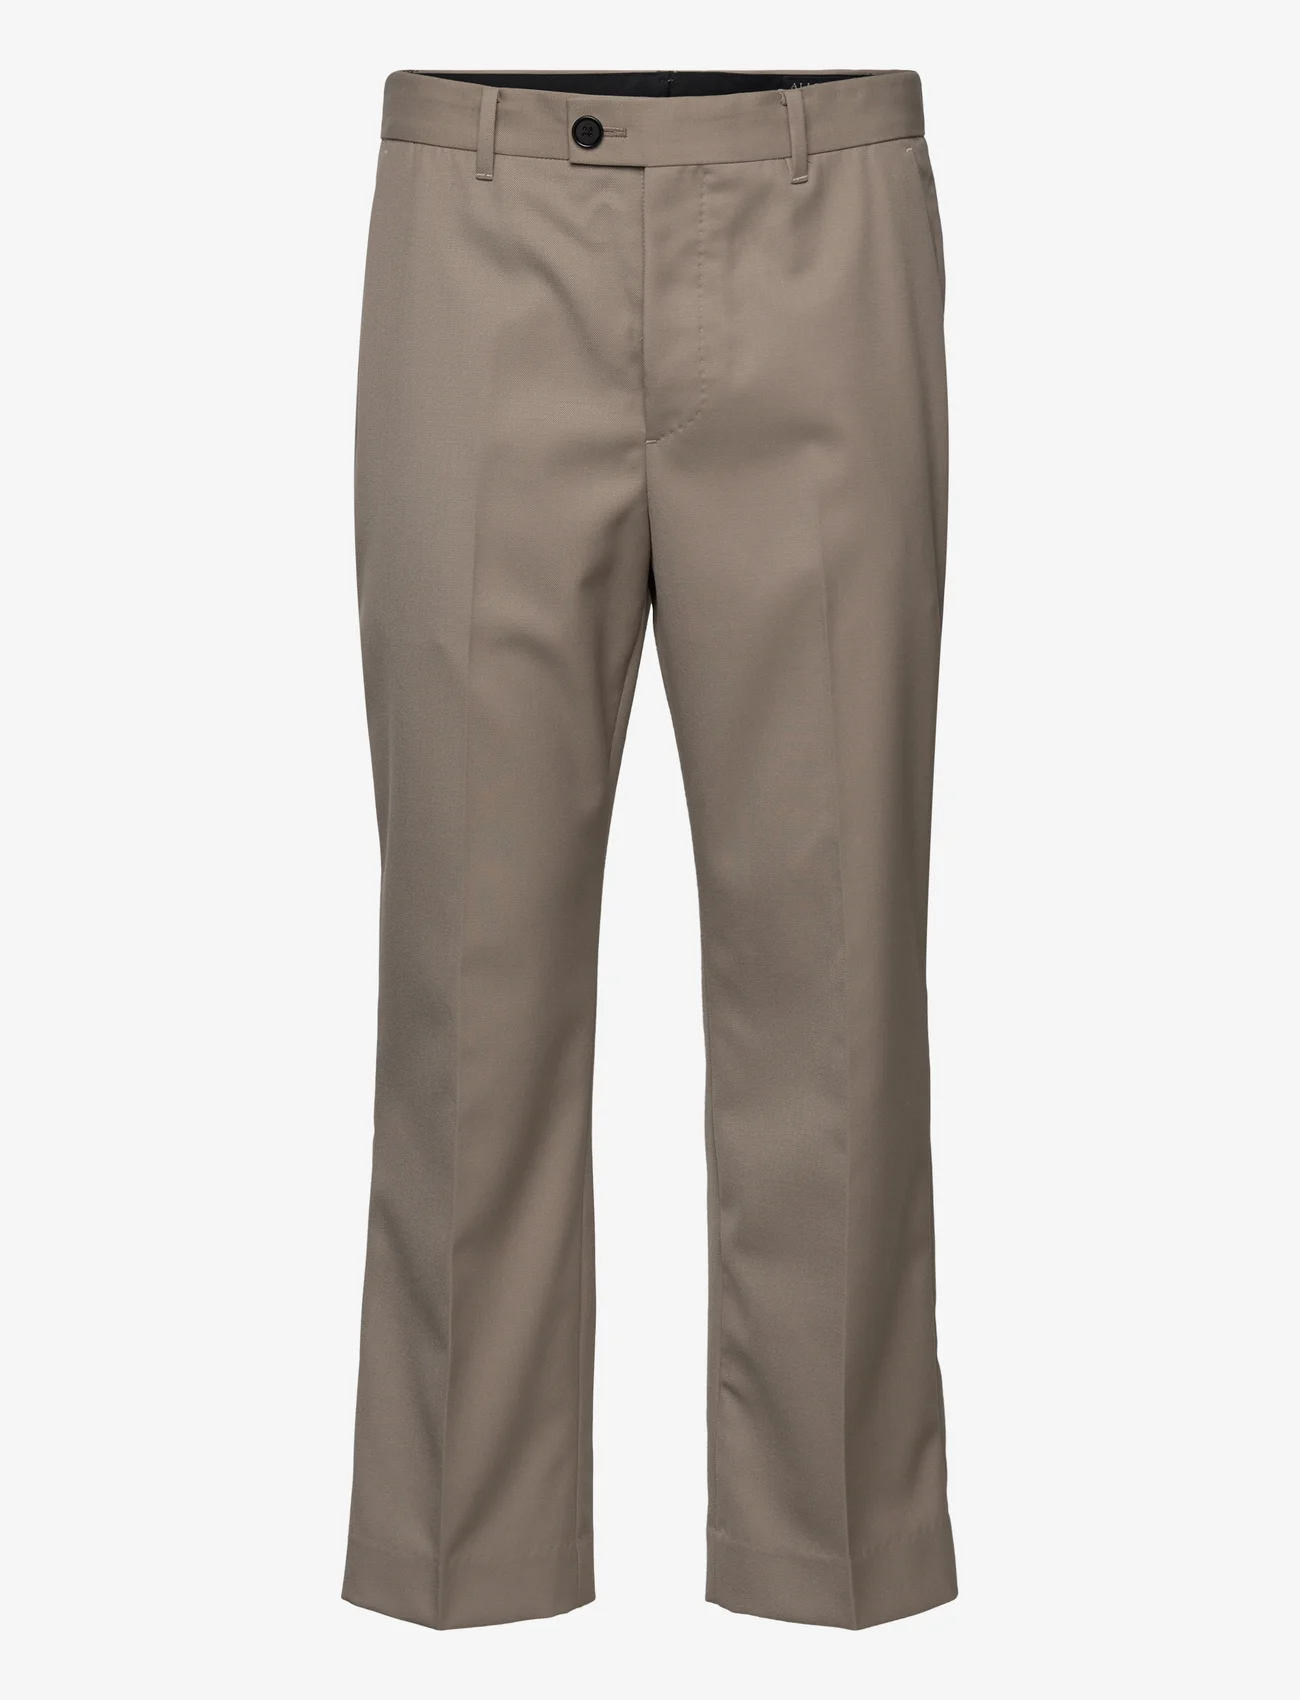 AllSaints - TANAR TROUSER - chino's - grey taupe - 0